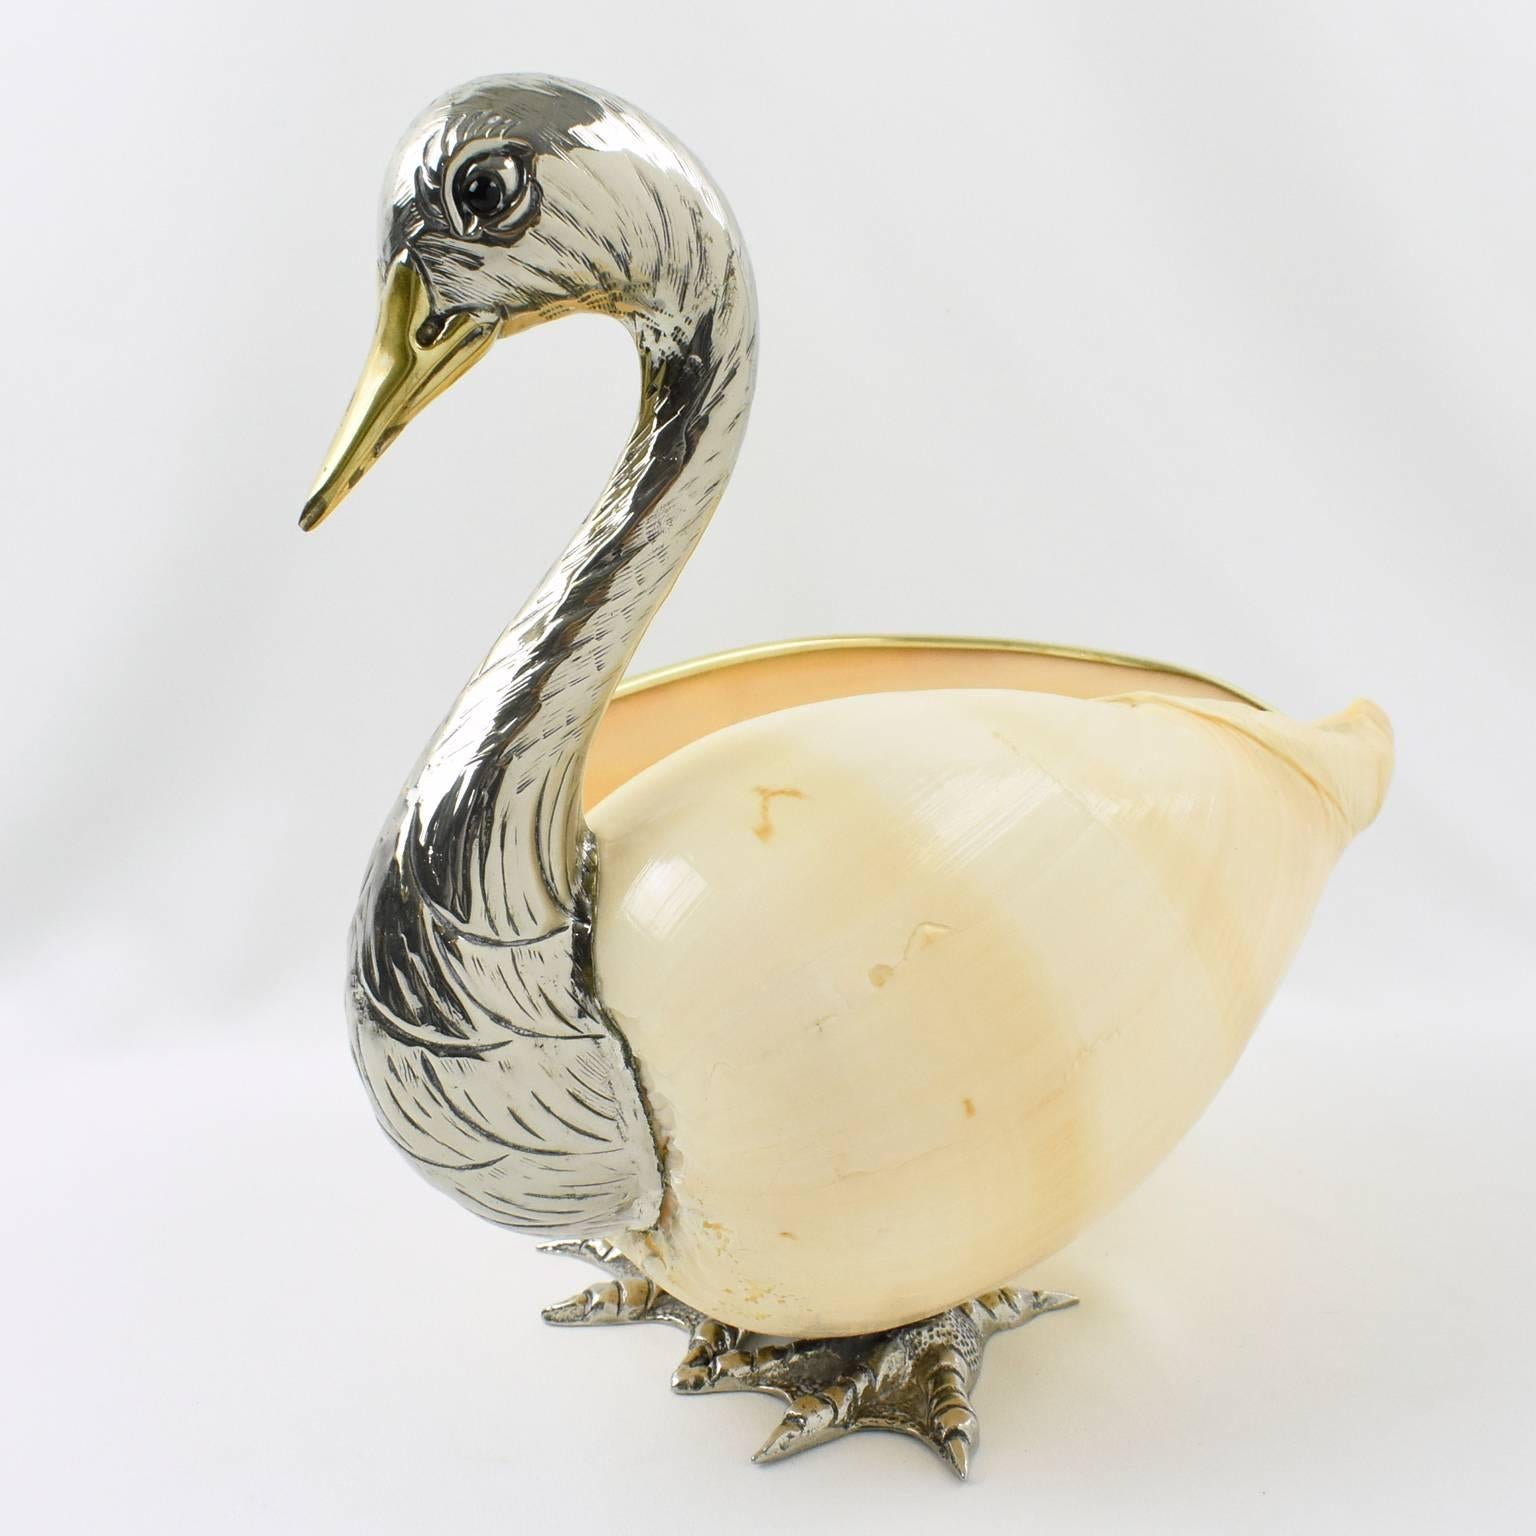 Beautiful large seashell swan designed and hand-crafted by Italian artist Gabriella Binazzi. You can hear the ocean in this lovely Binazzi object of art. The swan neck and feet are silver plated brass in original shiny condition, with black glass